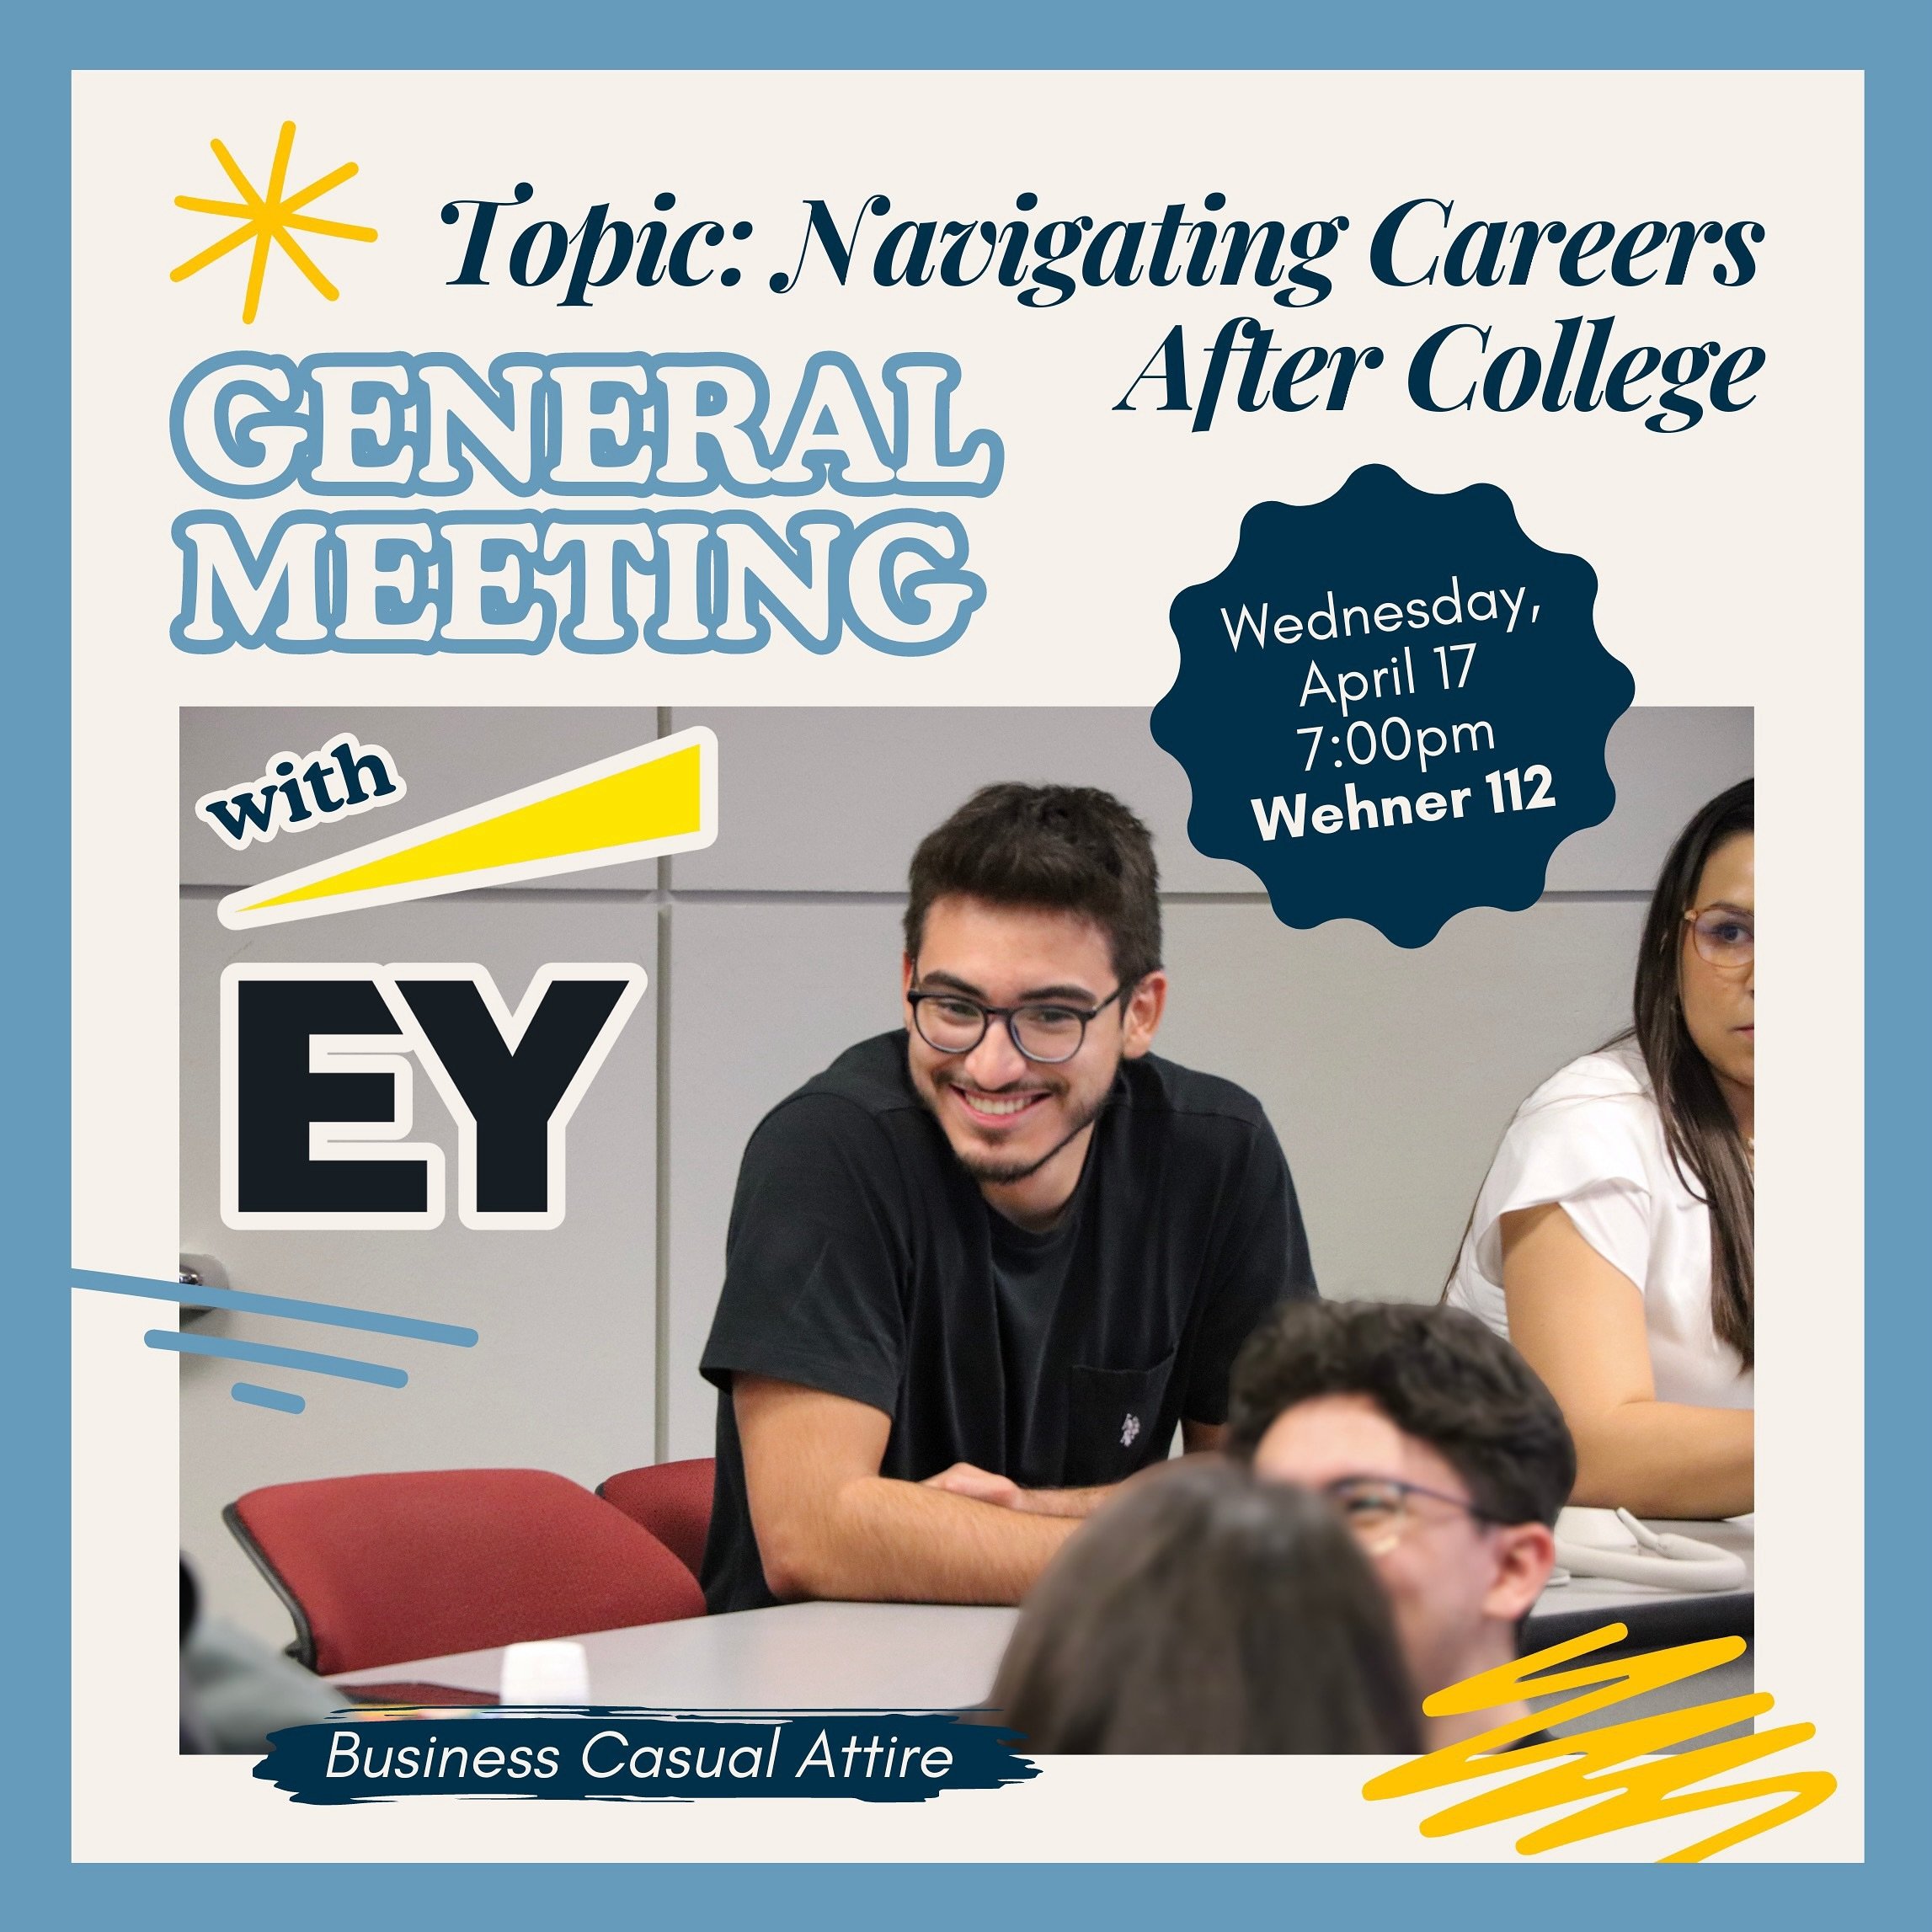 Join us for our LAST general meeting of the semester with EY! 🥳 They will be presenting &ldquo;Navigating Careers After College&rdquo; 👩&zwj;💼🧑&zwj;💼

We will have food of course, and maybe even some merch and prizes to close out the school year